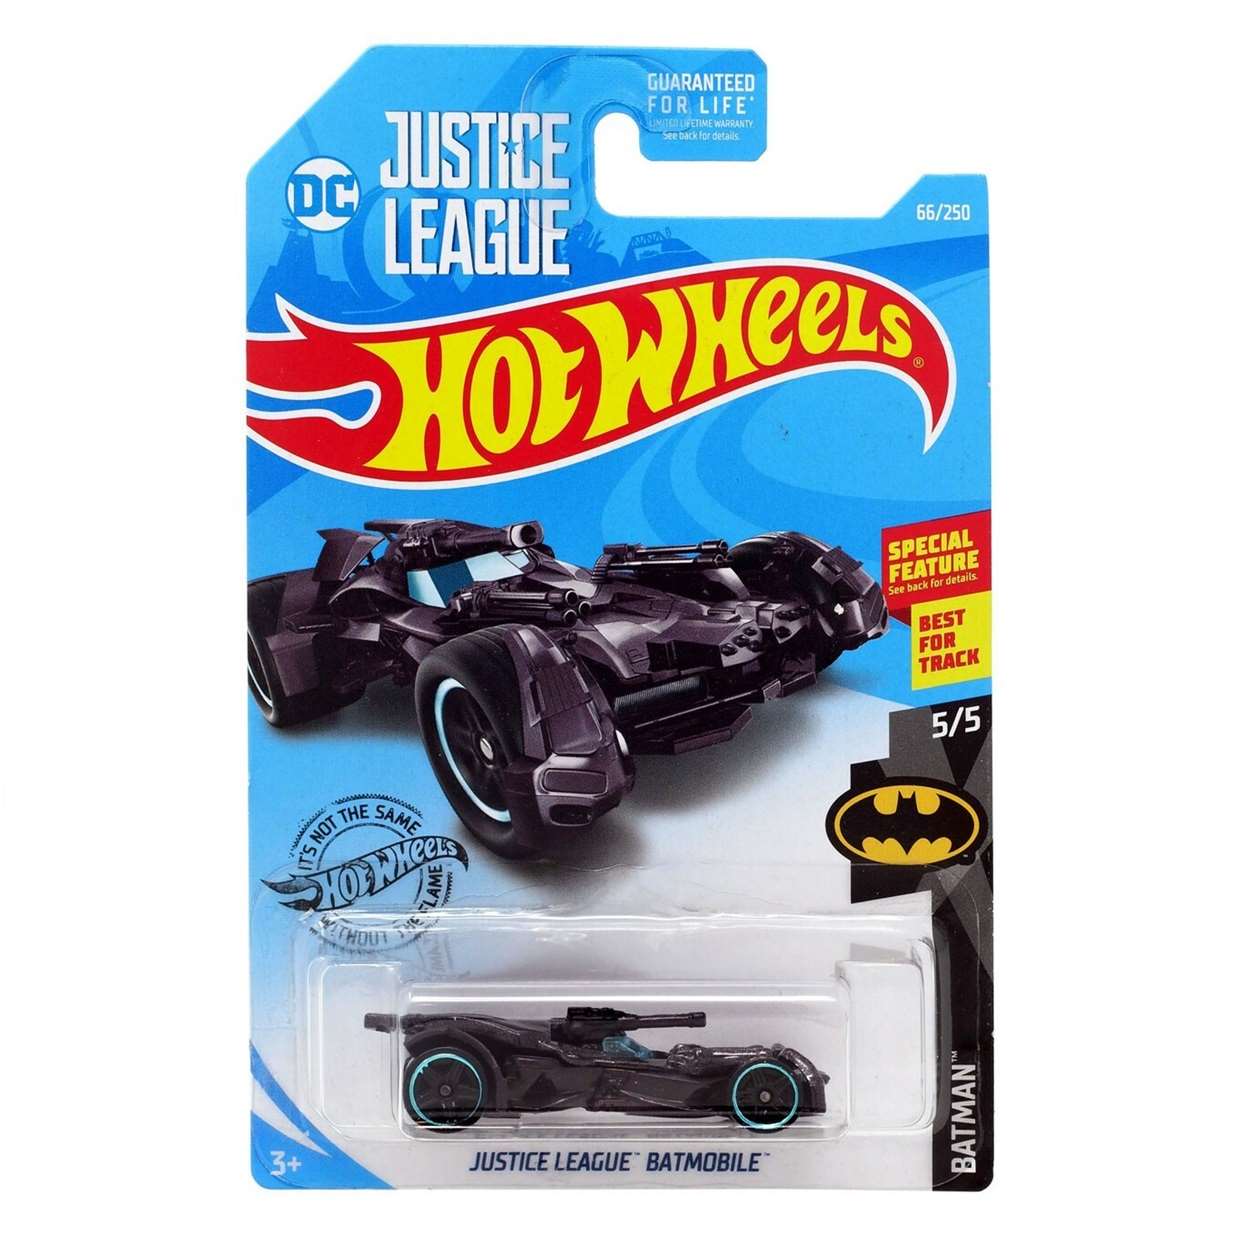 Batmobile Justice League Special Best For Track Hot Wheels 